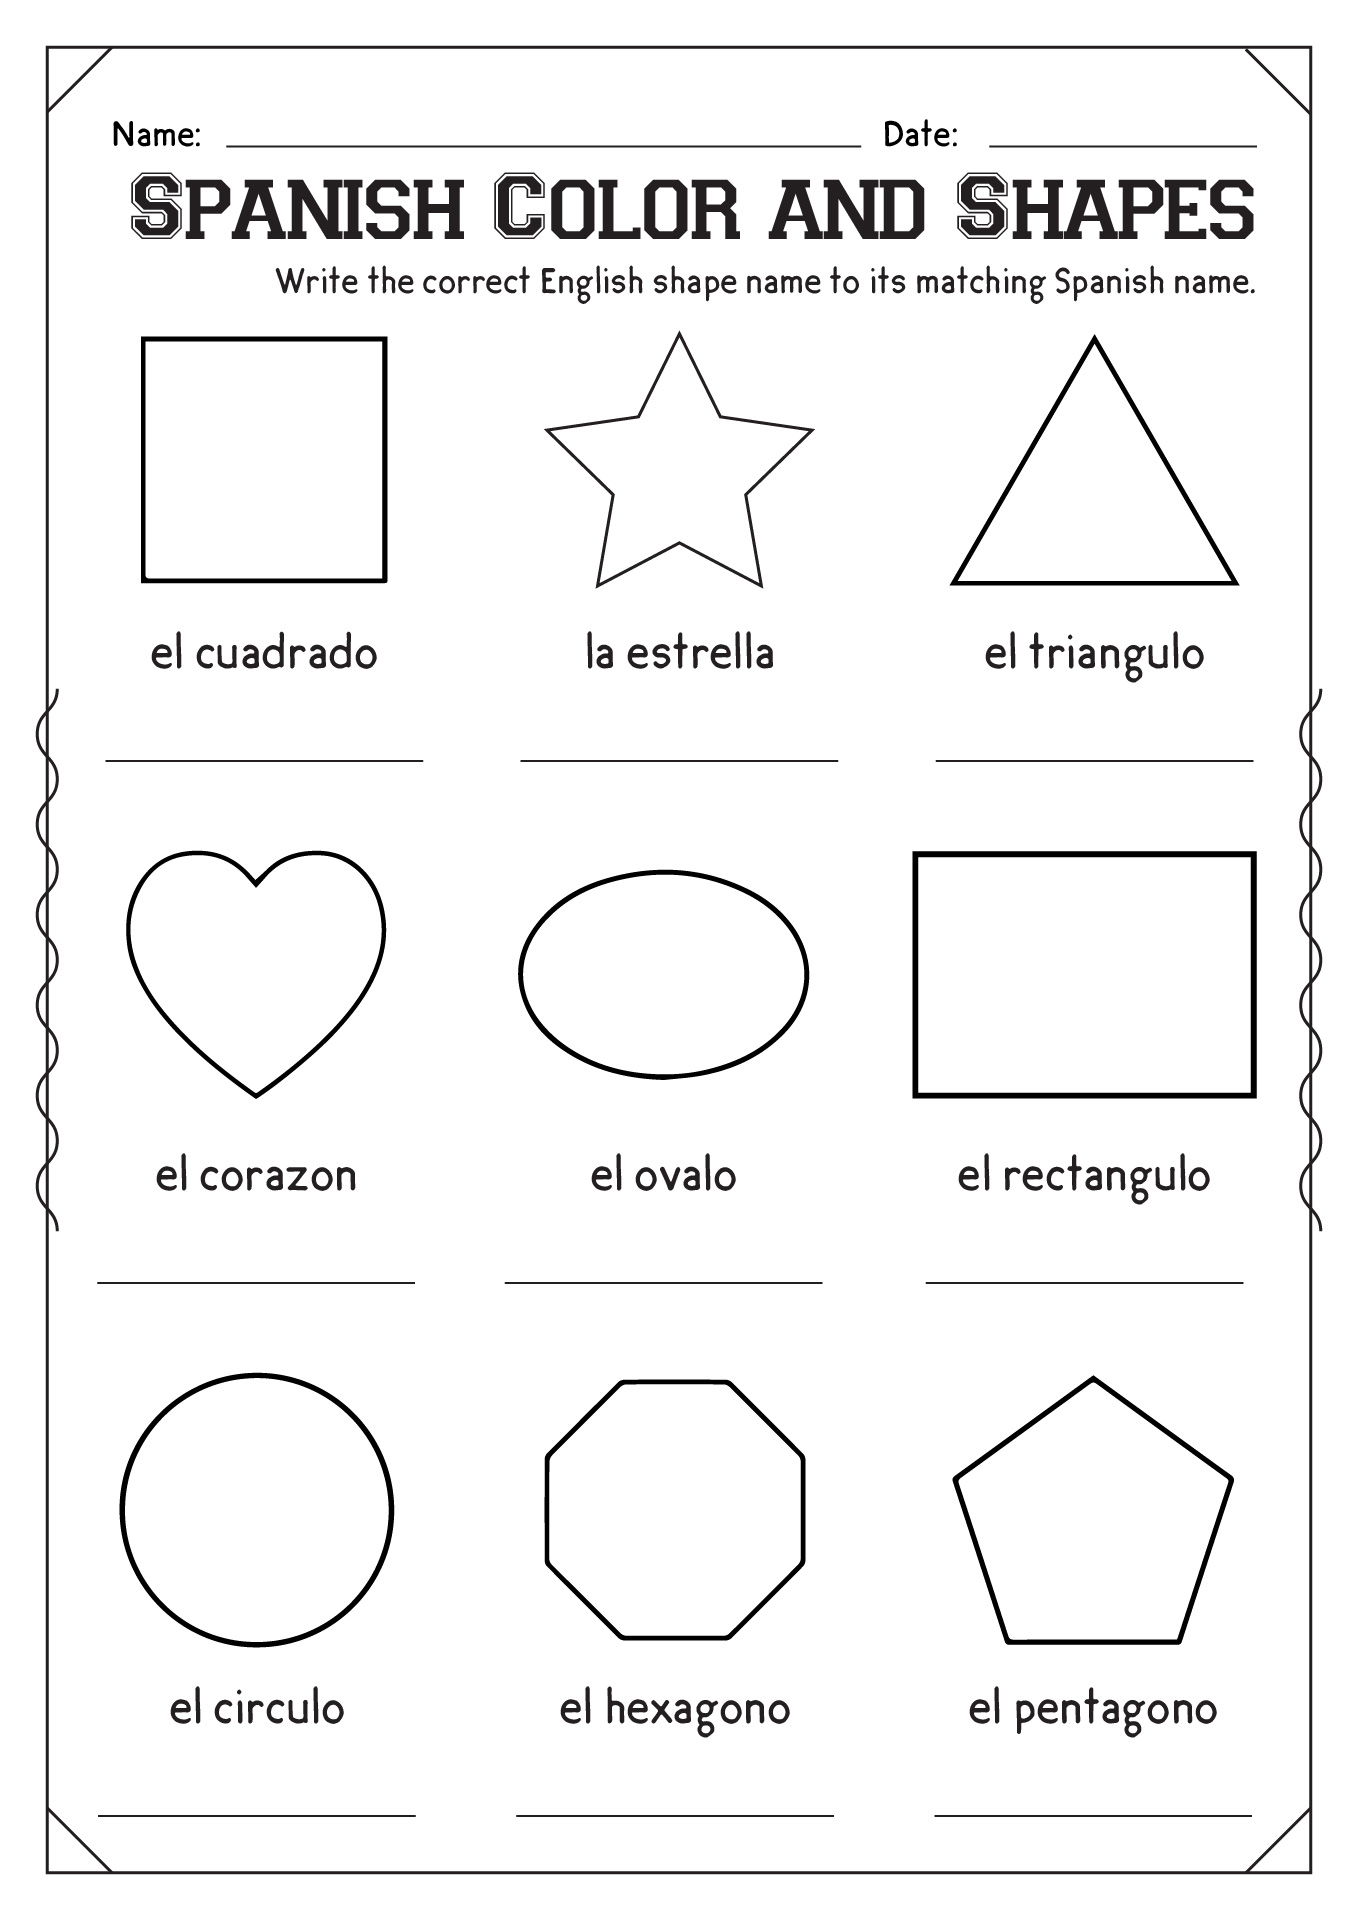 Spanish Colors and Shapes Worksheets